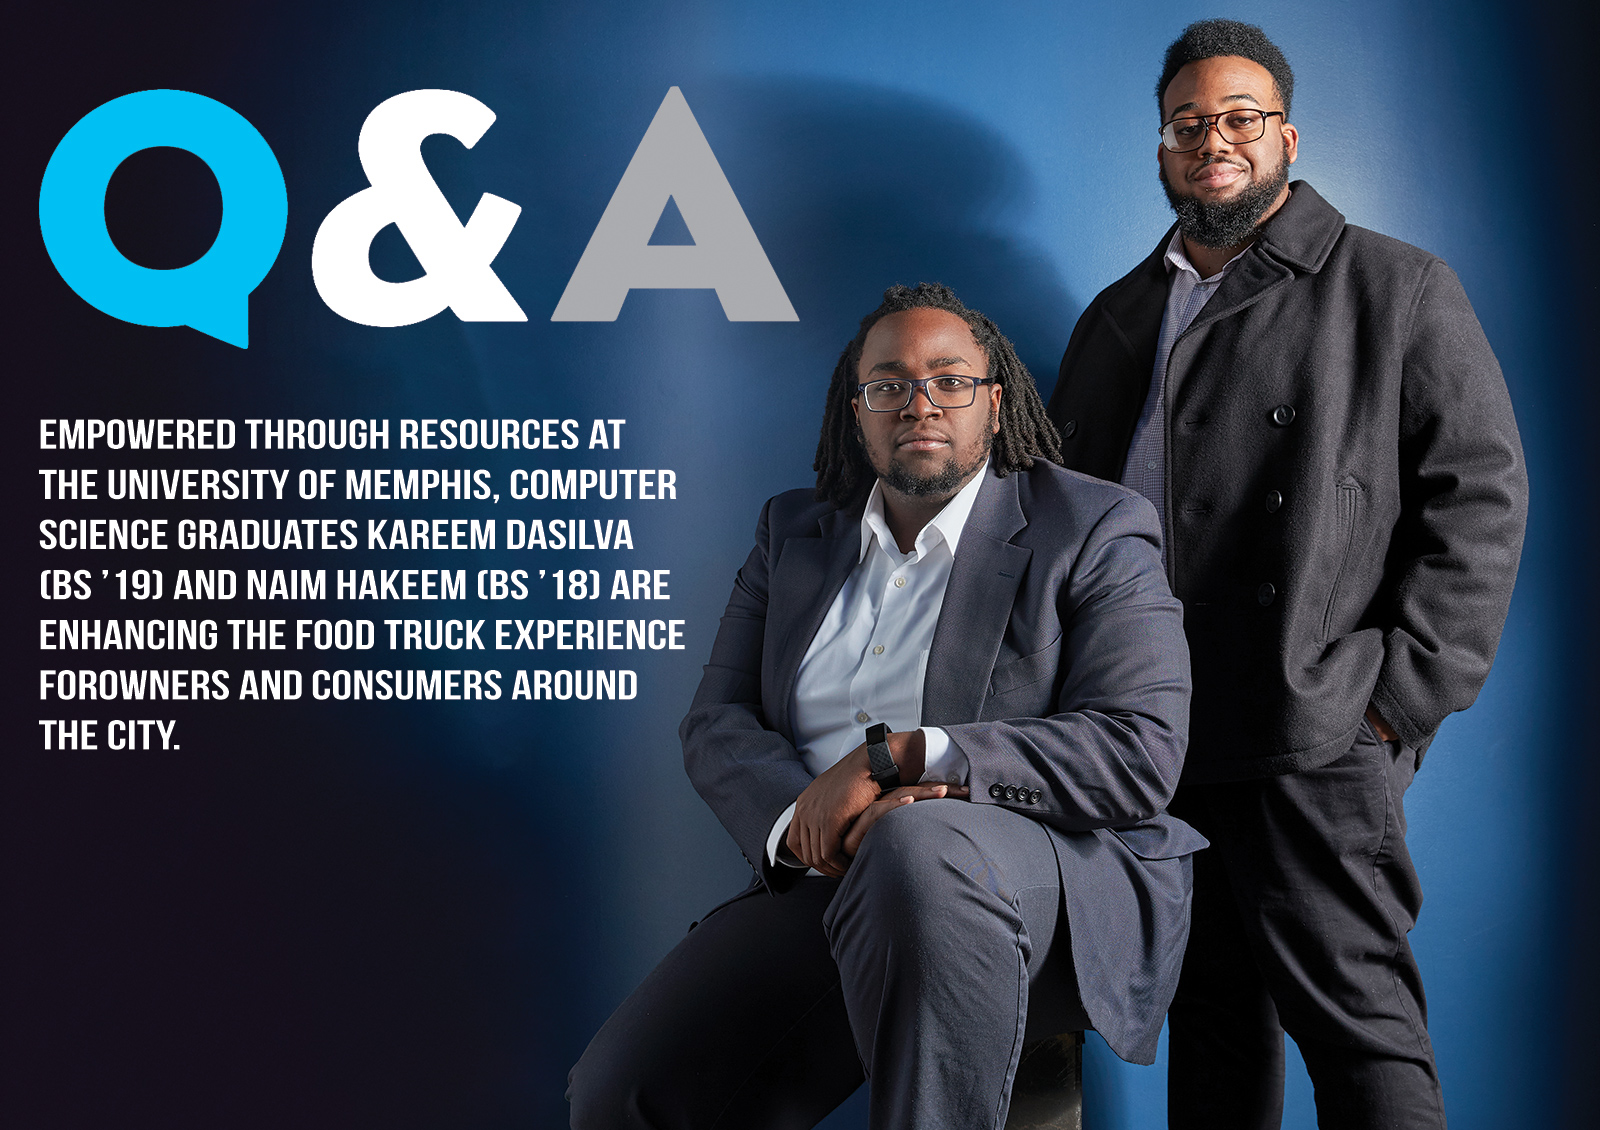 Q & A | Empowered through resources at the University of Memphis, computer science graduates Kareem Dasilva (BS ’19) and Naim Hakeem (BS ’18) are enhancing the food truck experience for owners and consumers around the city. (photo of Naim Hakeem and Kareem Dasilva)